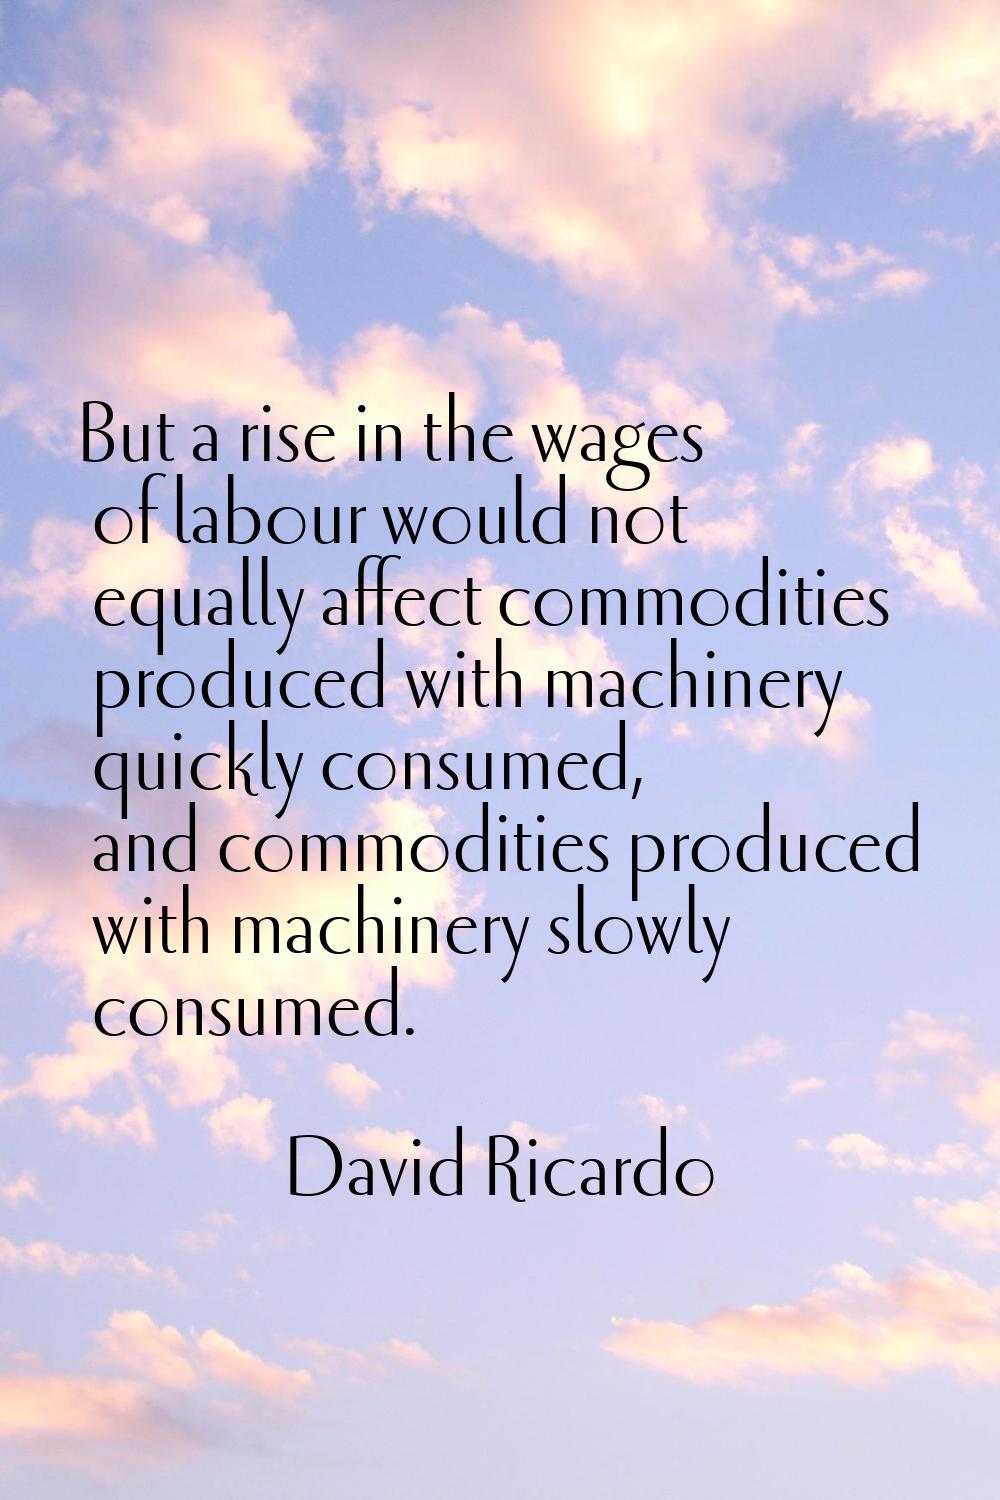 But a rise in the wages of labour would not equally affect commodities produced with machinery quic